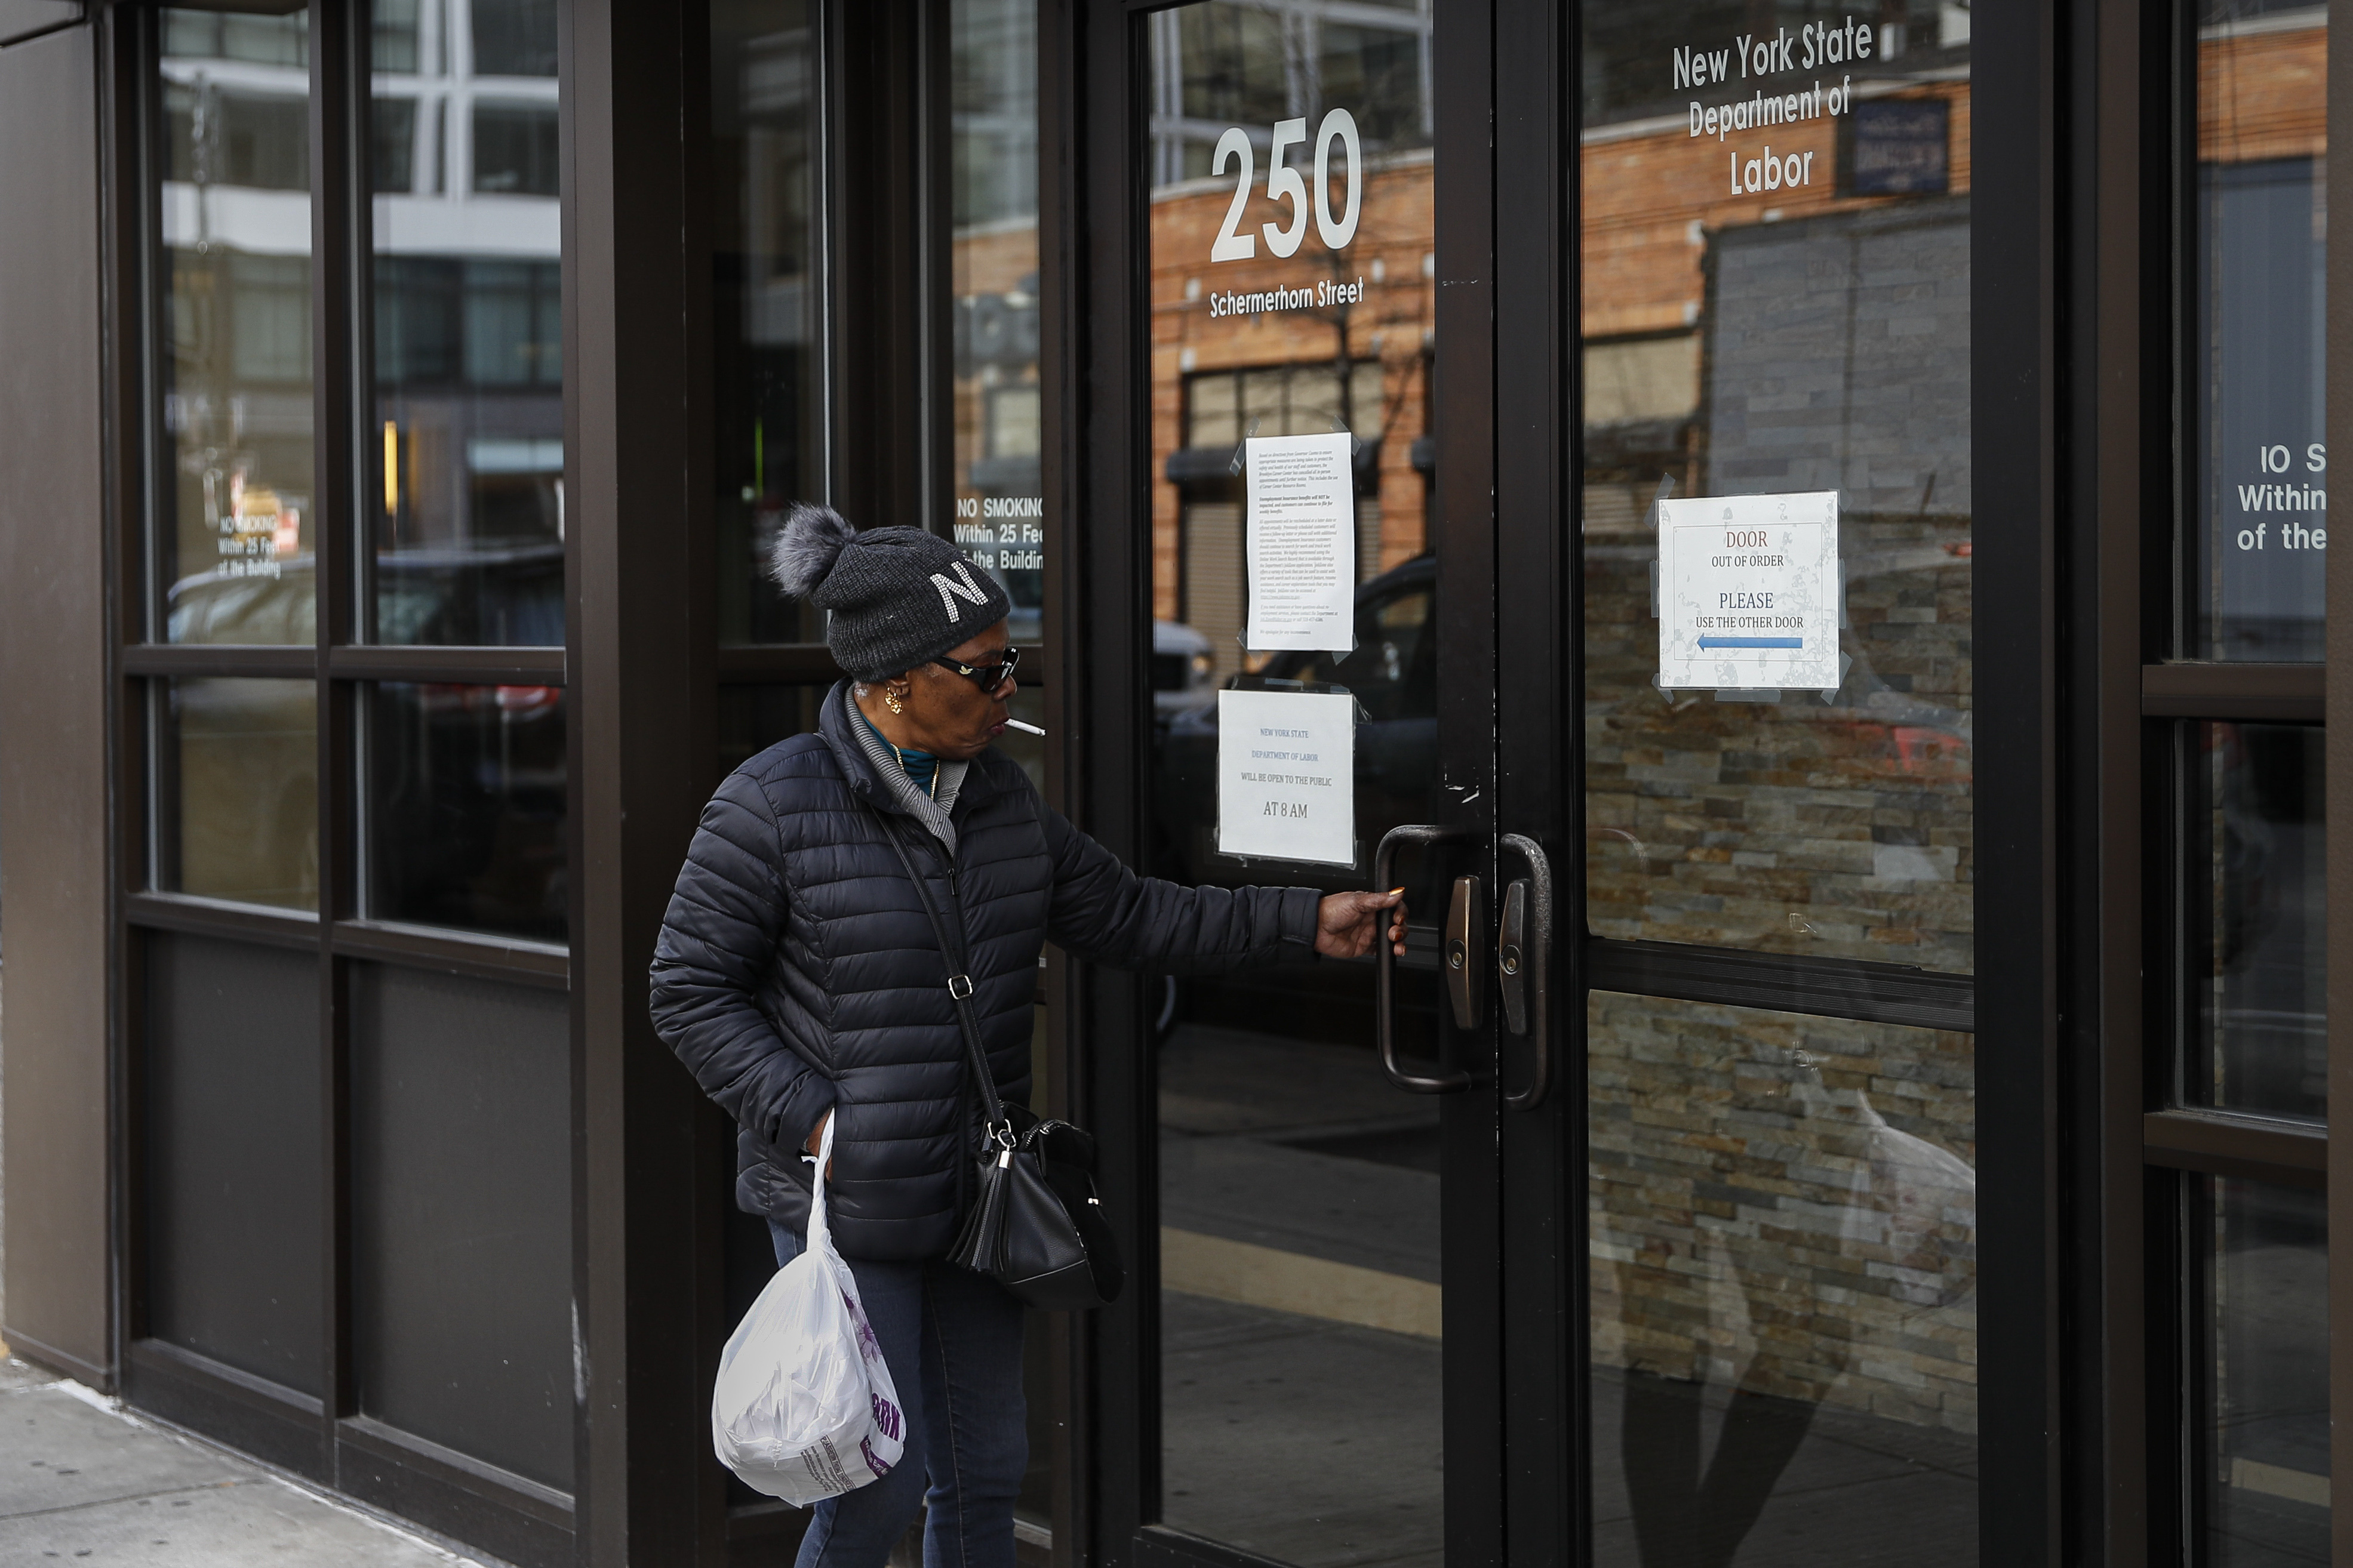 Visitors are unable to gain access to the Department of Labor due to closures over coronavirus concerns, Wednesday, March 18, 2020, in New York. (John Minchillo—AP)